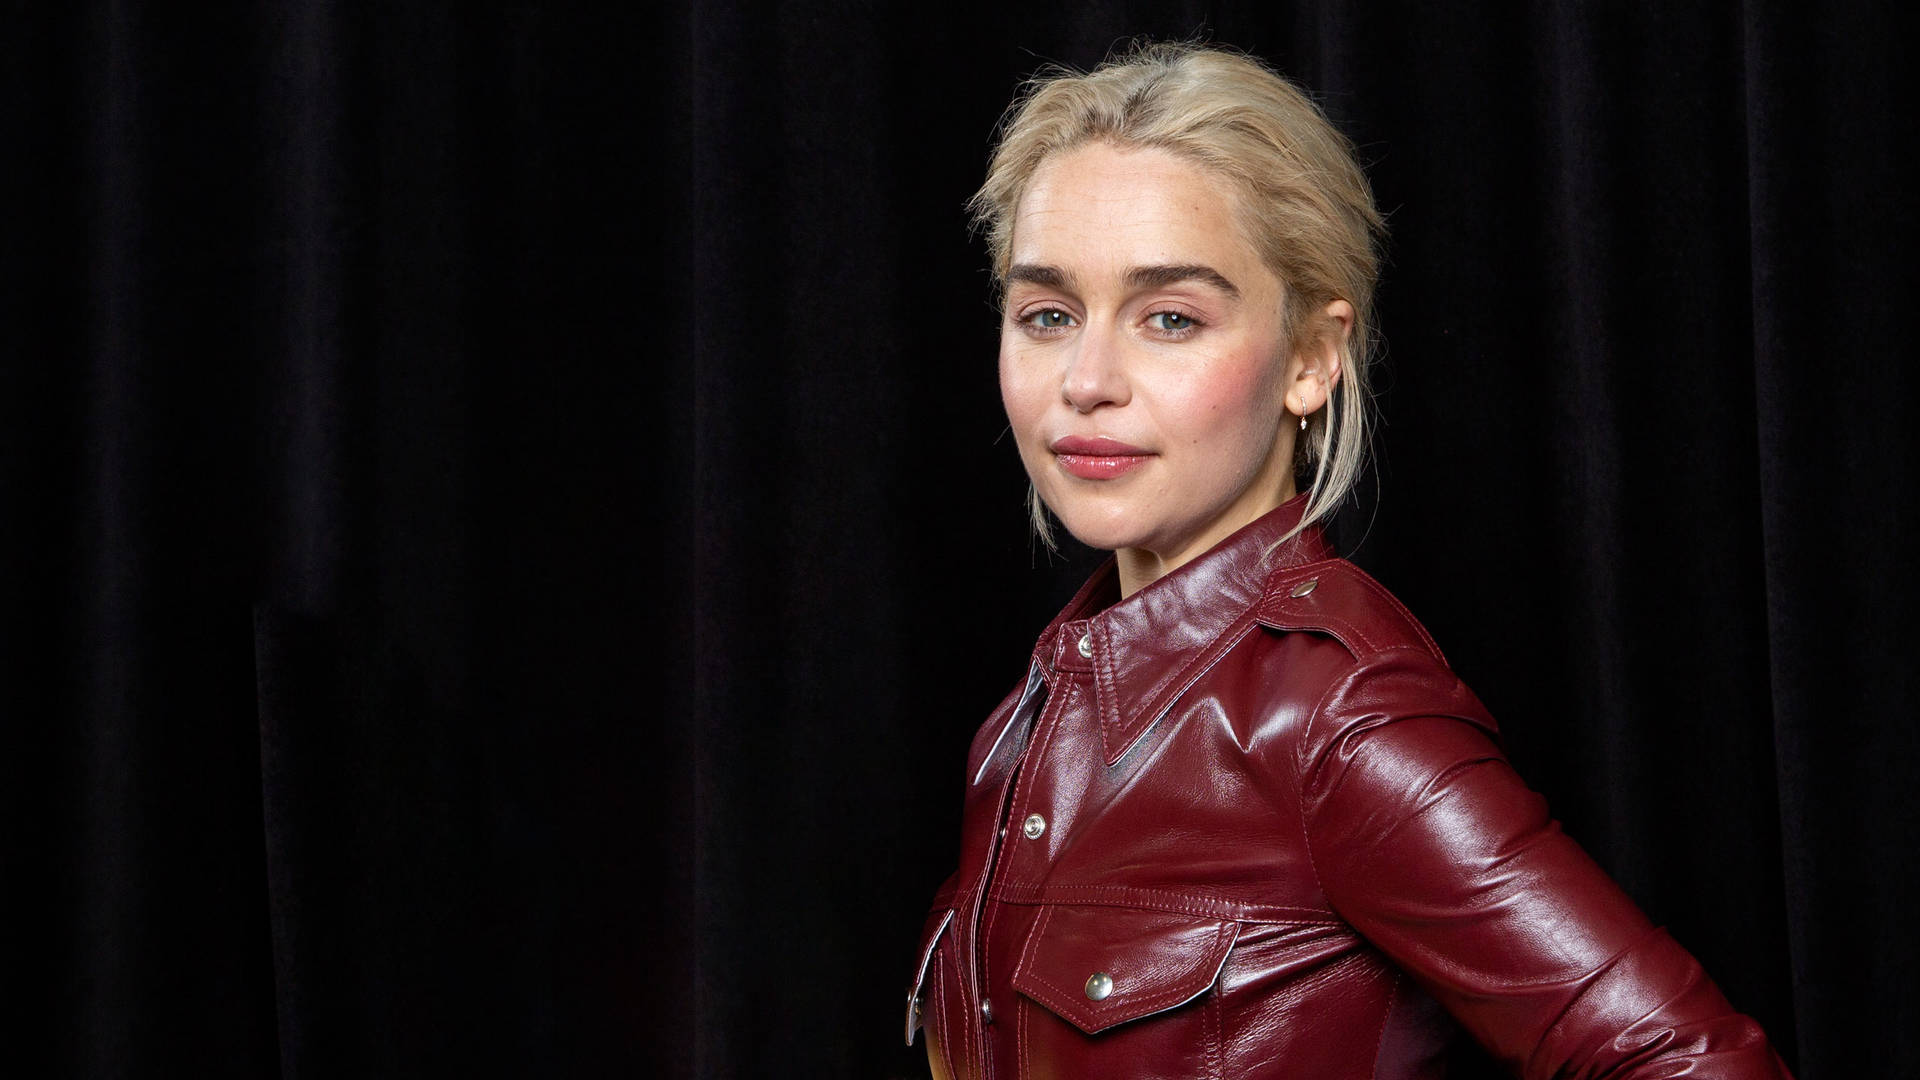 Emilia Clarke In Leather Outfit Wallpaper